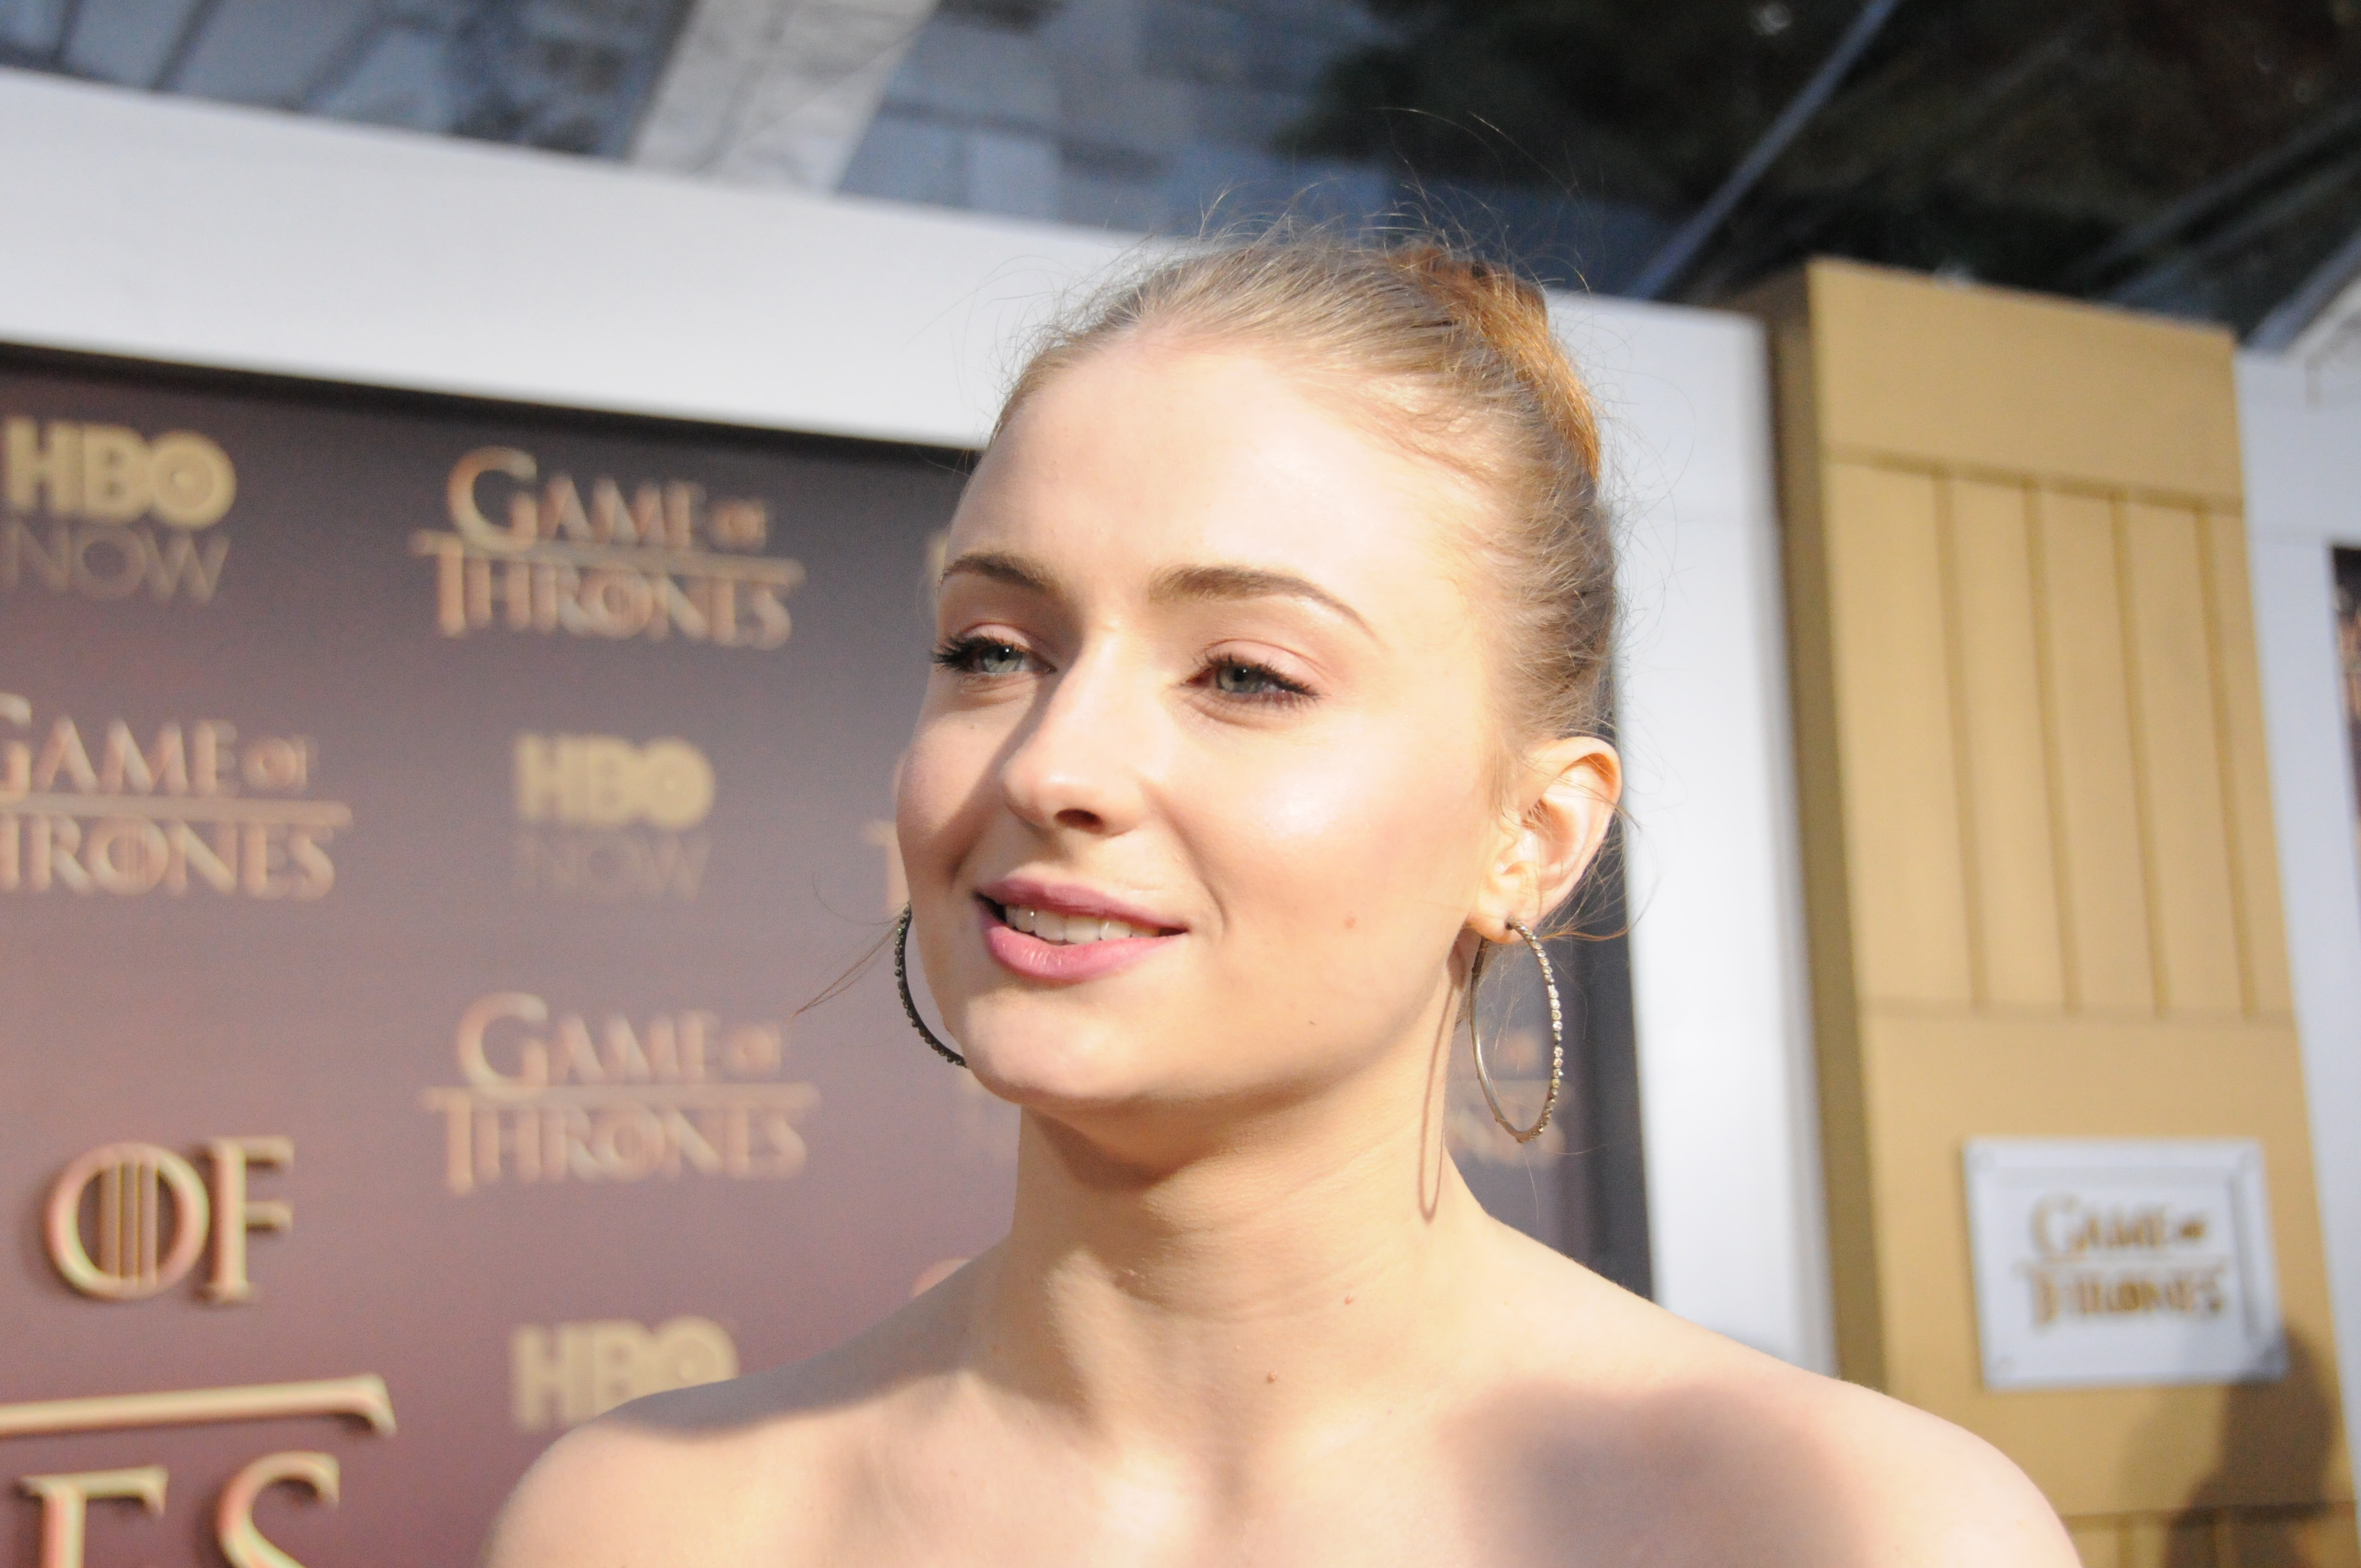 Actress Sophie Turner, who plays Sansa Stark on 'Game of Thrones,' at the show's Season 5 premiere in San Francisco on March 23, 2015.